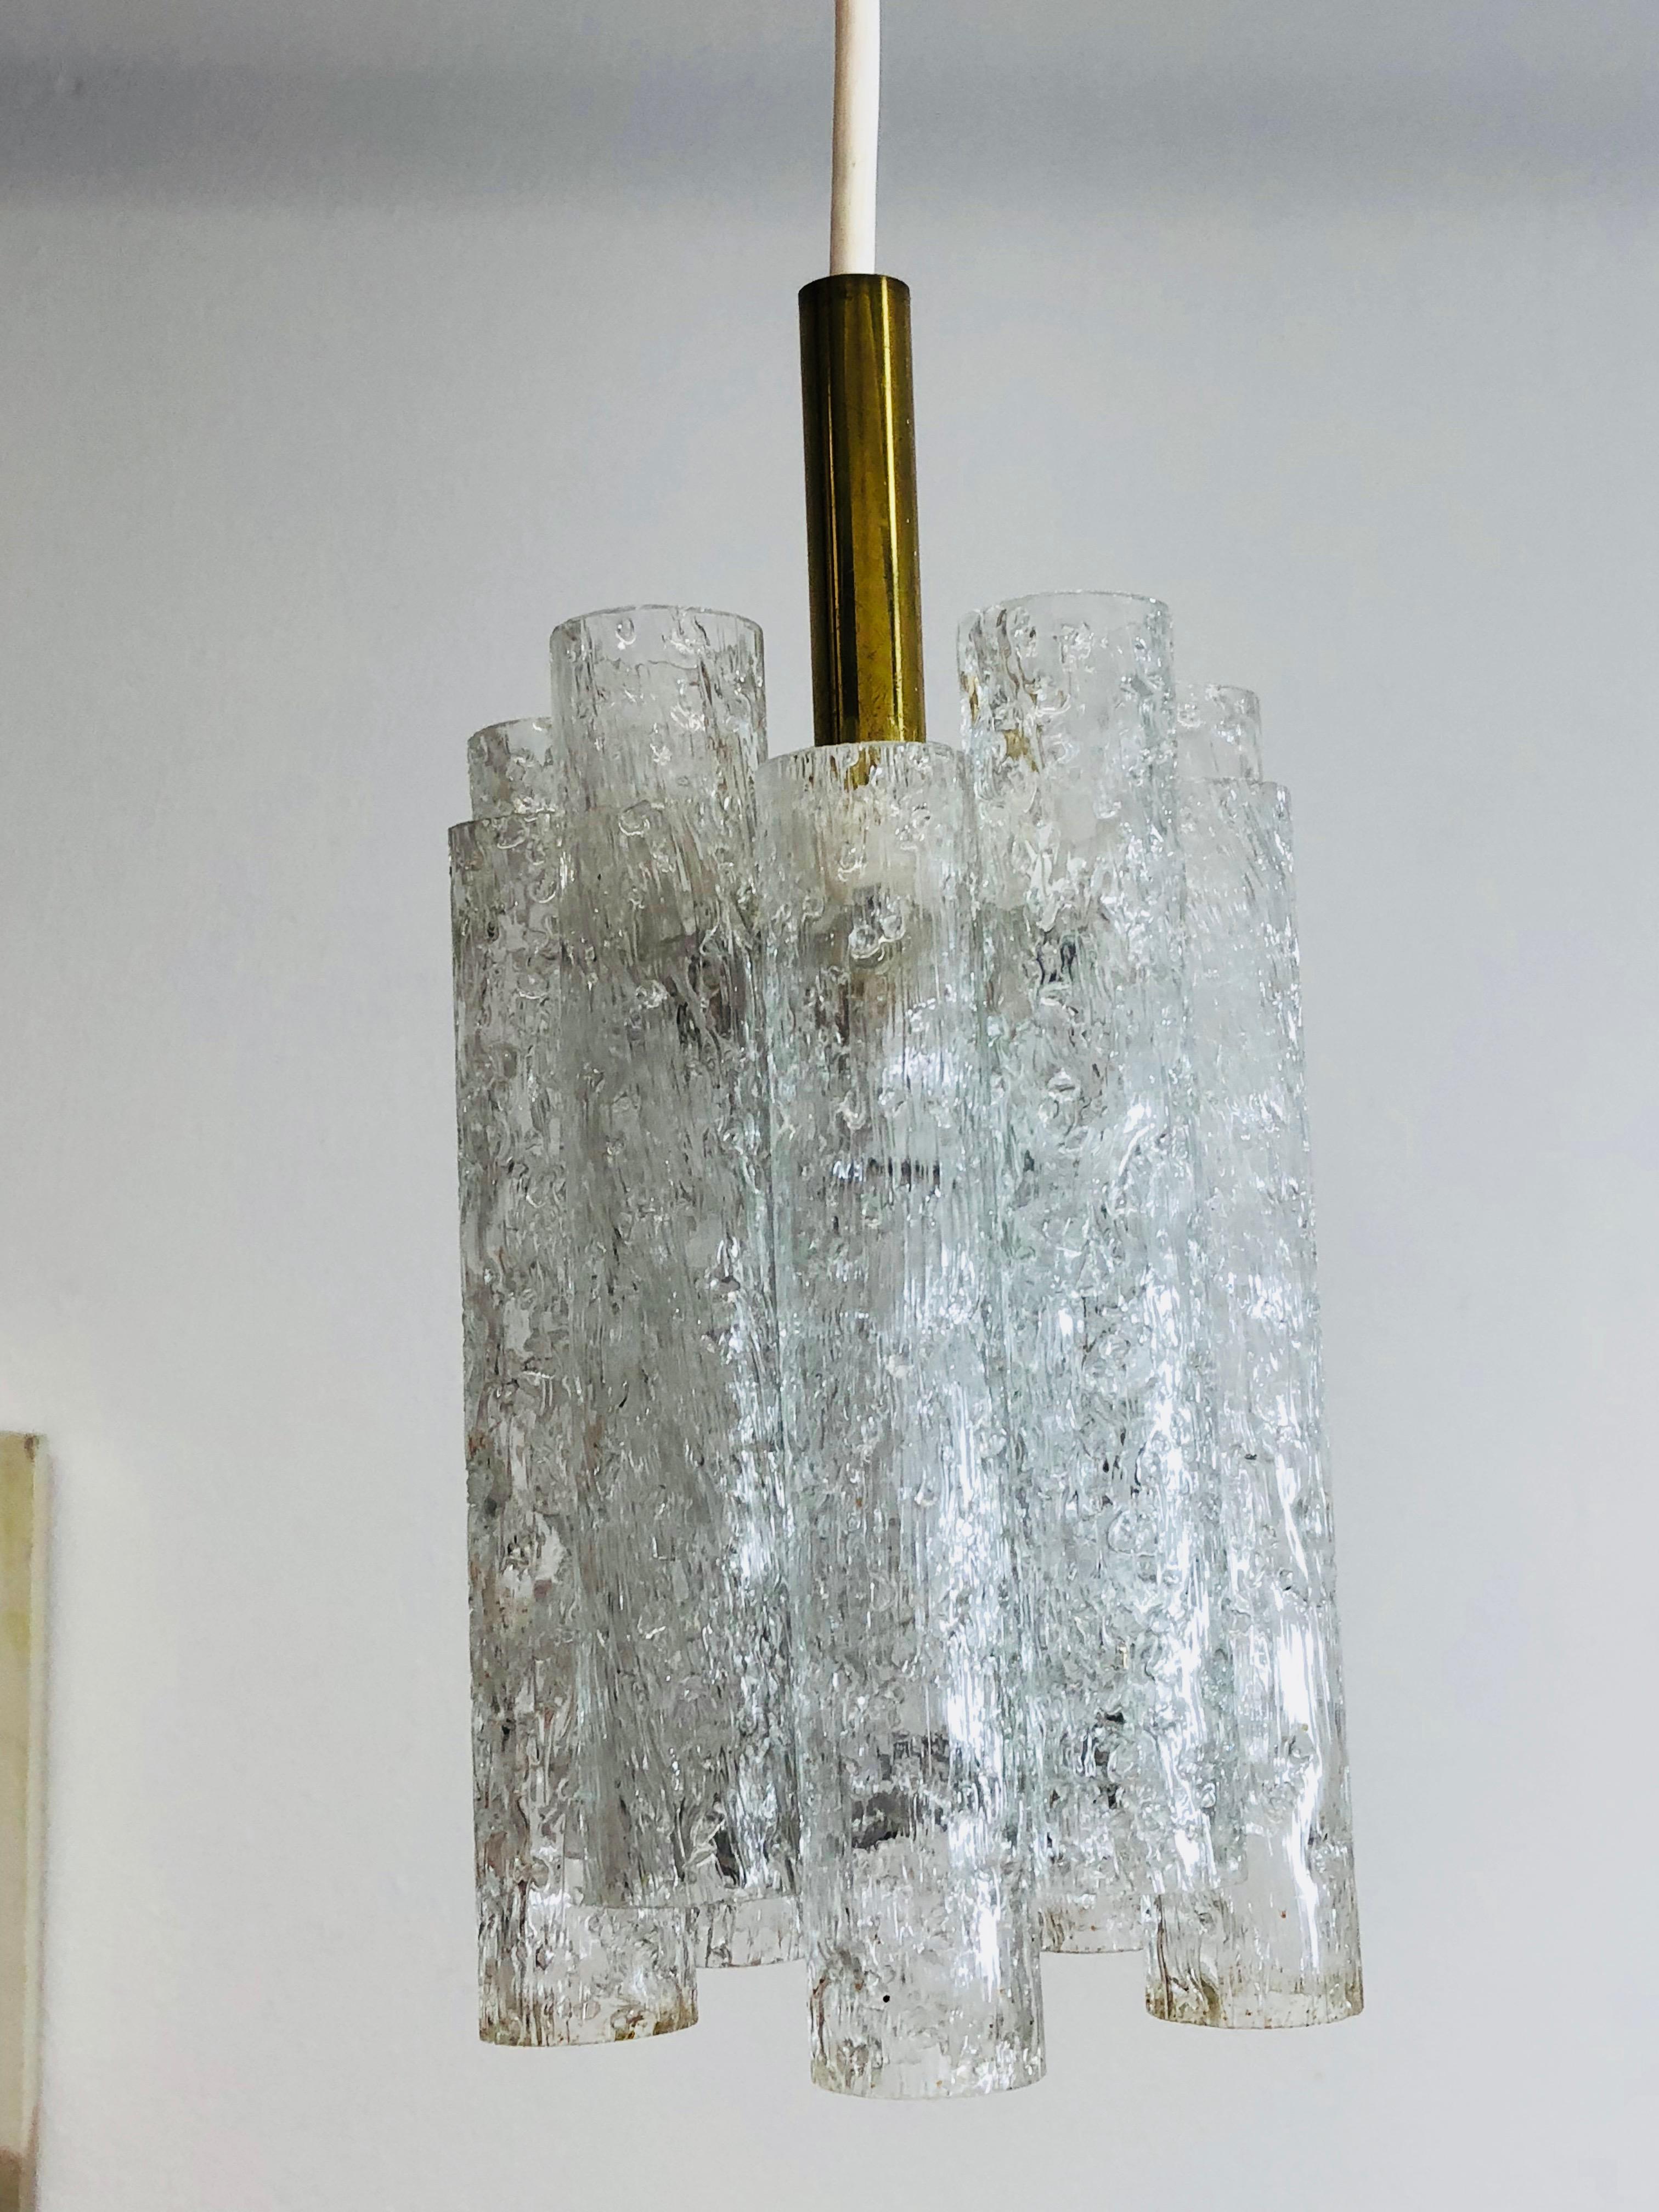 Gorgeous glass tube pendant light made by Doria Leuchten, Germany. It is in very good condition and requires a European E14 candelabra bulb, up to 60 watts. It is totally approximate 30